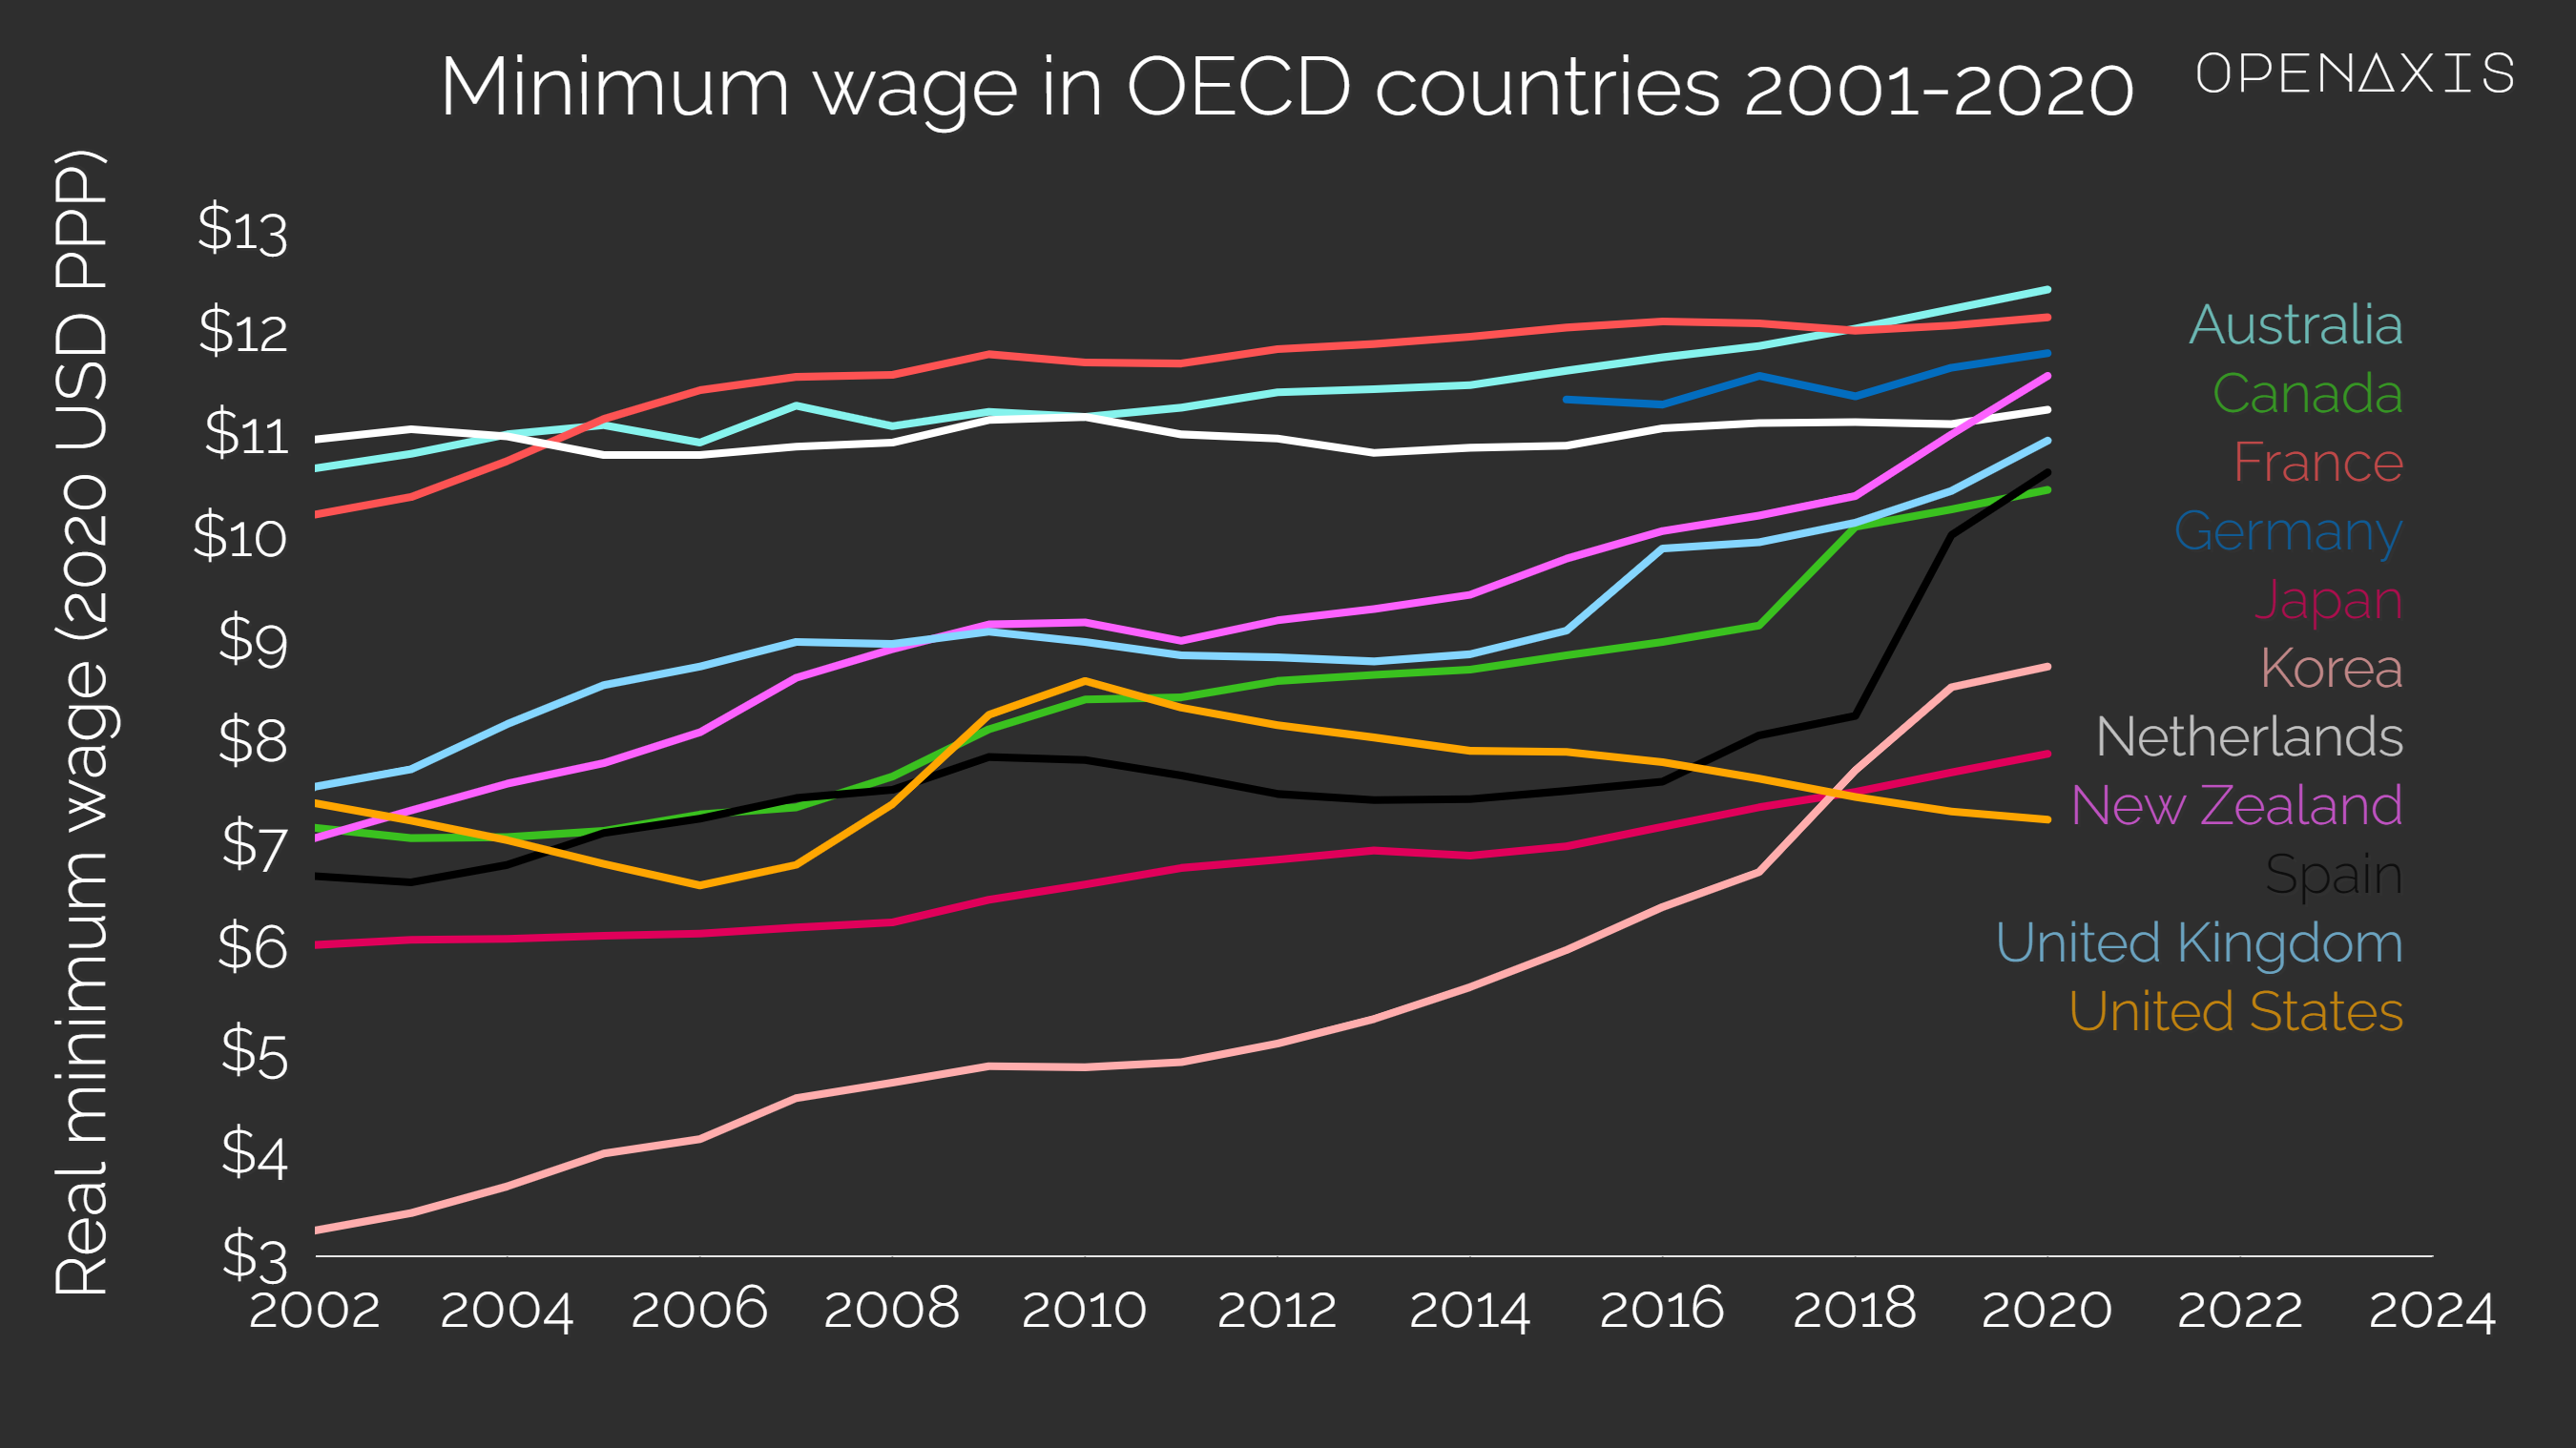 <p>This dataset ranks OECD countries by their national minimum wage from 2001 to 2020. I selected a few of the major economies to track how their minimum wages fluctuated over time. Most are linear, with the United States on the decline since 2010 and Korea making the most gains up almost $6 since 2002. </p><p>﻿<a href="/search?q=%23wages" target="_blank">#wages</a>﻿ </p><p>Source: <a href="/data/3679" target="_blank">OECD</a></p>